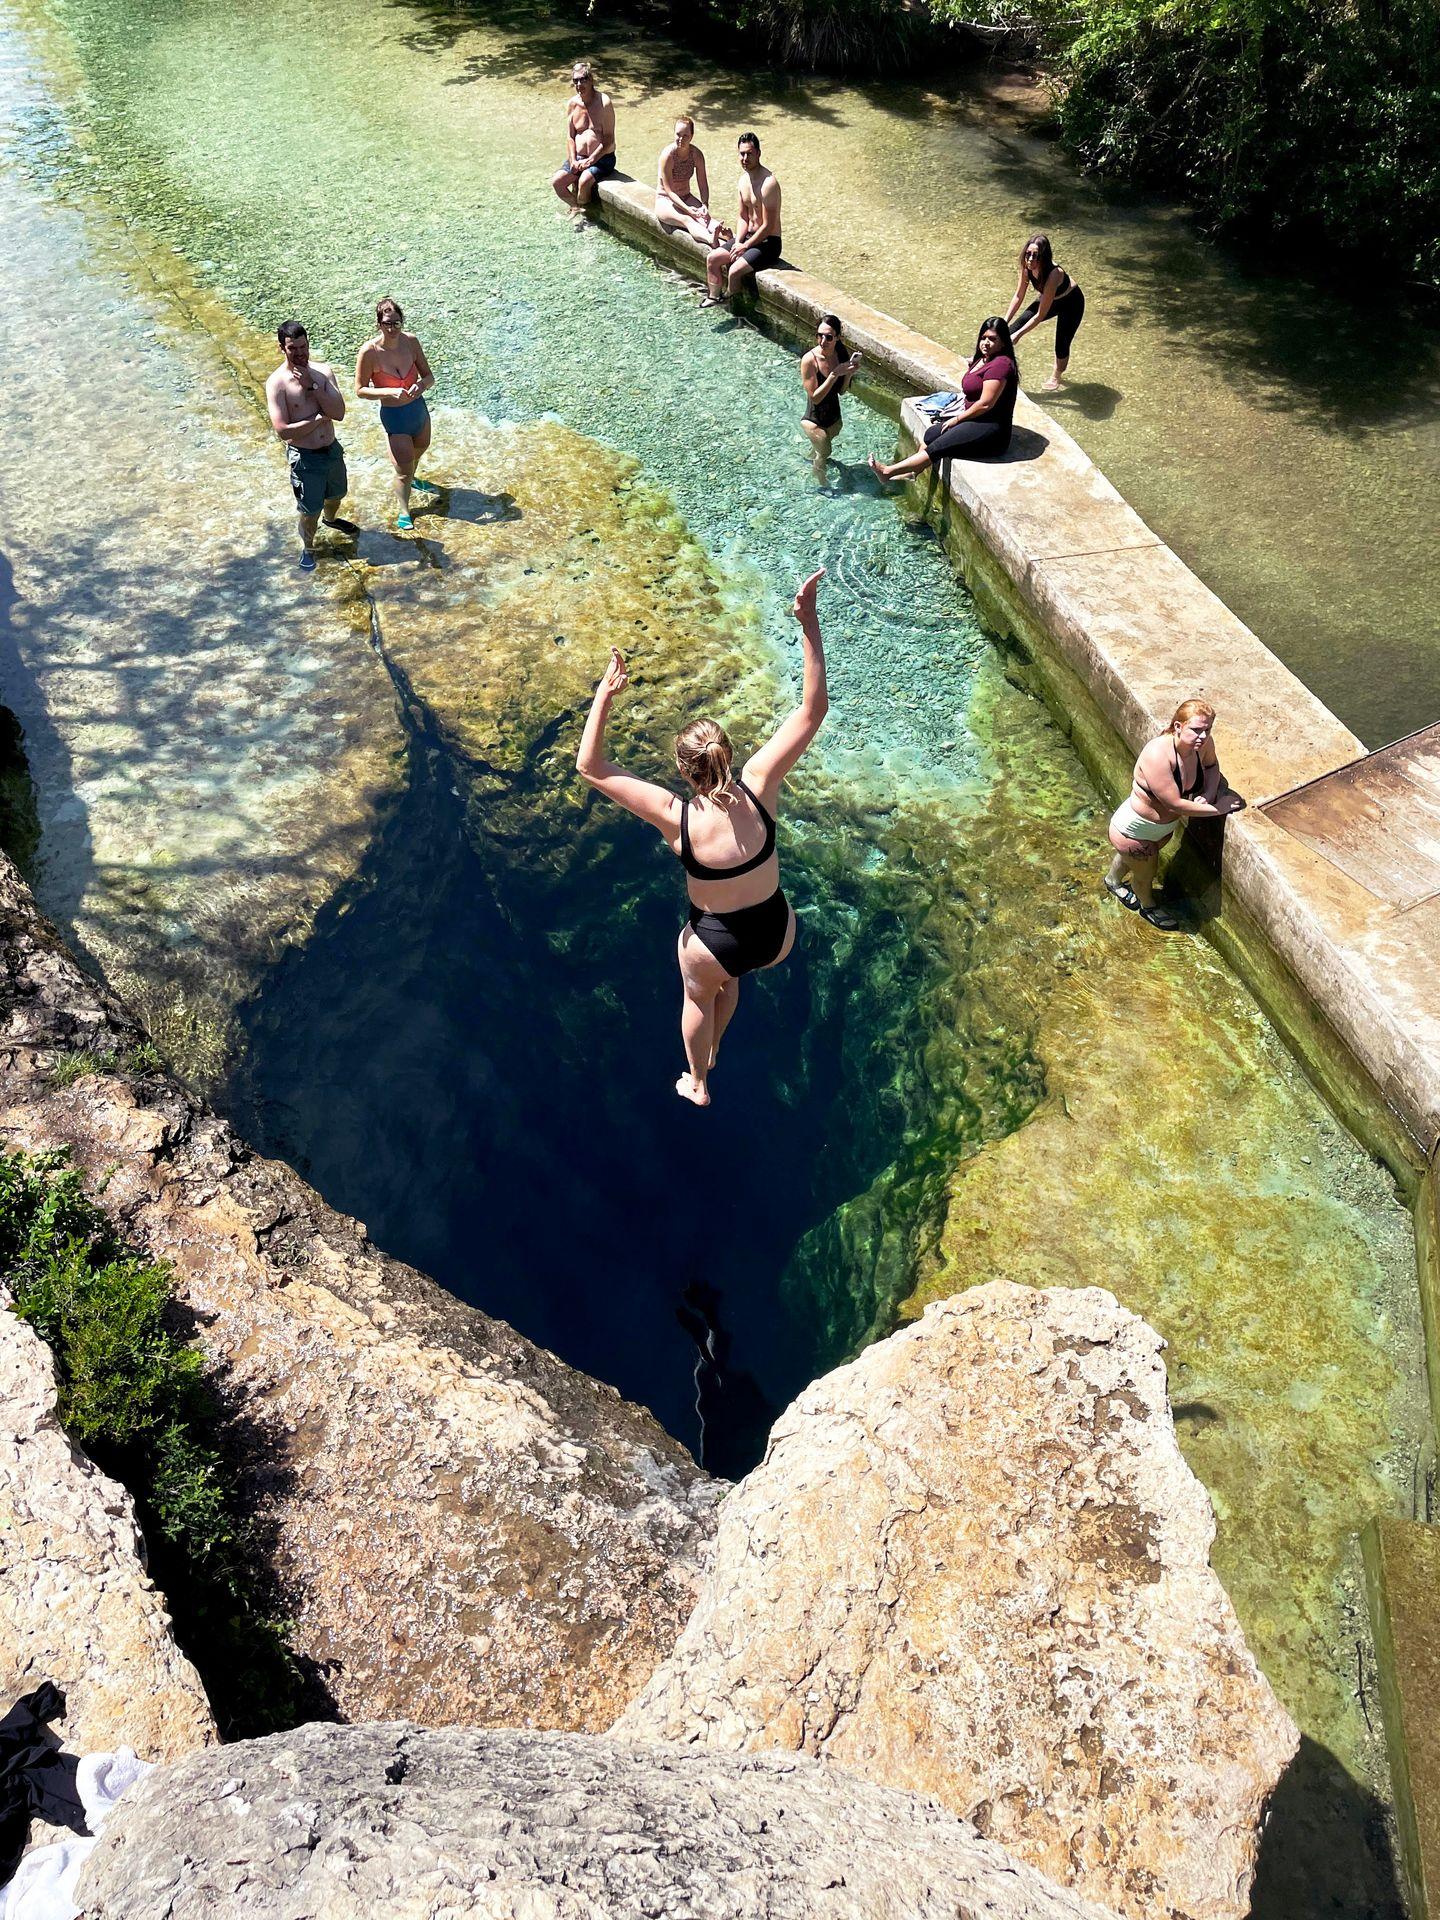 Lydia jumping into a small pool of water at Jacob's Well. The water is a clear greenish blue color